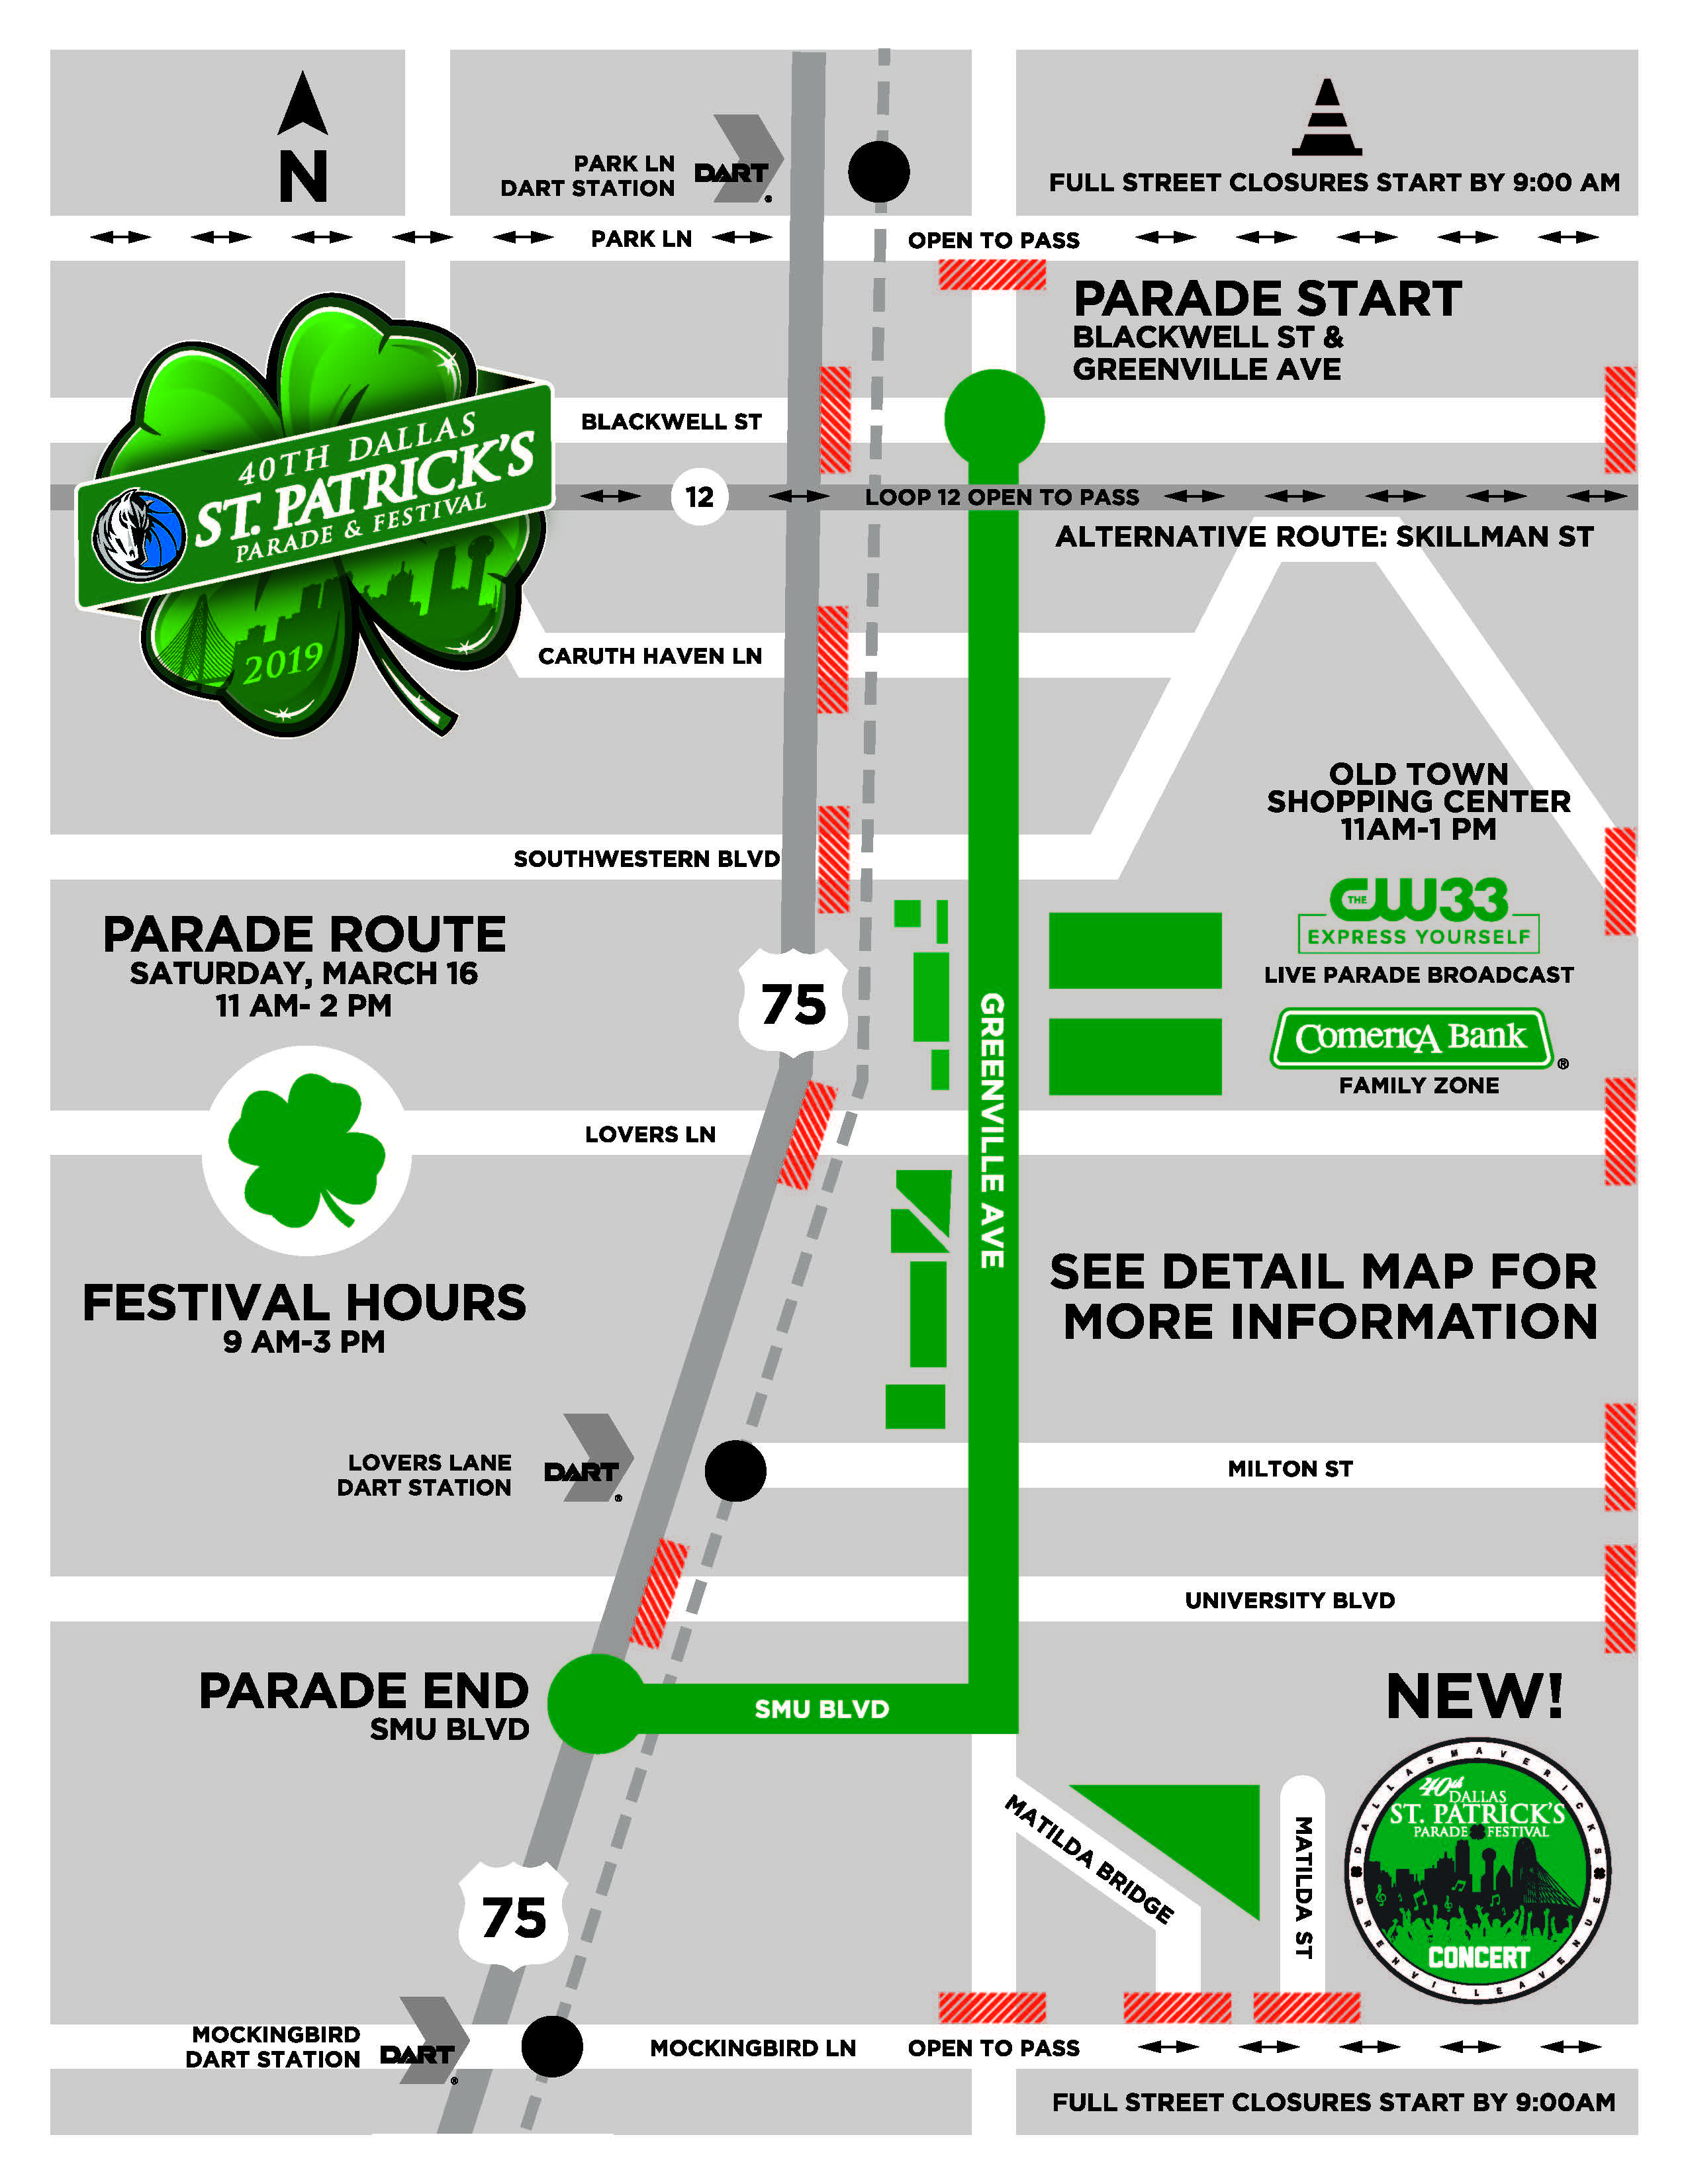 Details for Your 40th Annual St. Patrick's Day Parade Have Arrived D